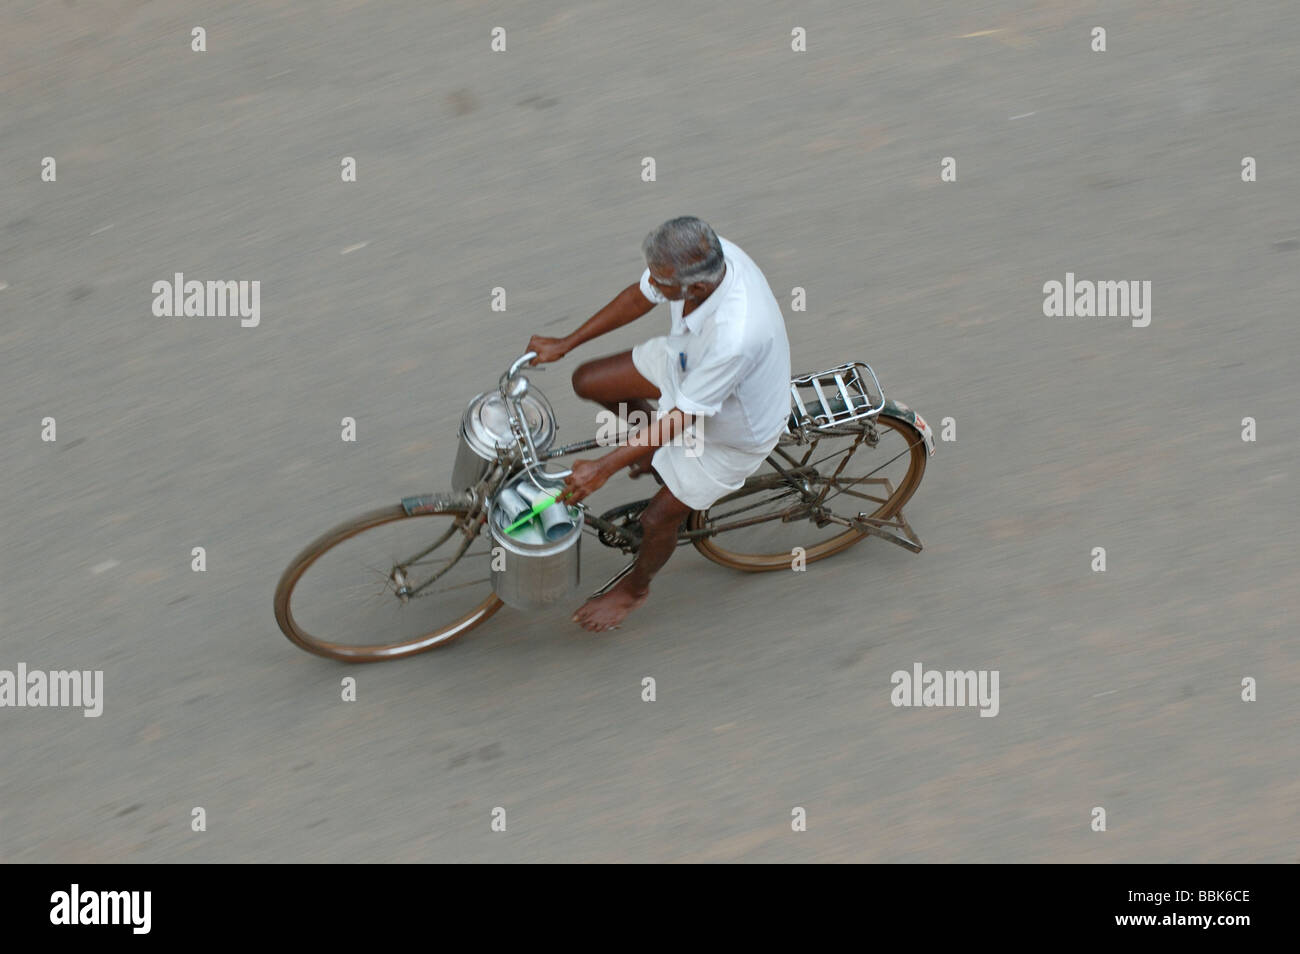 India, Tamil Nadu, Madurai. Indian man riding a bicycle. No releases available. Stock Photo